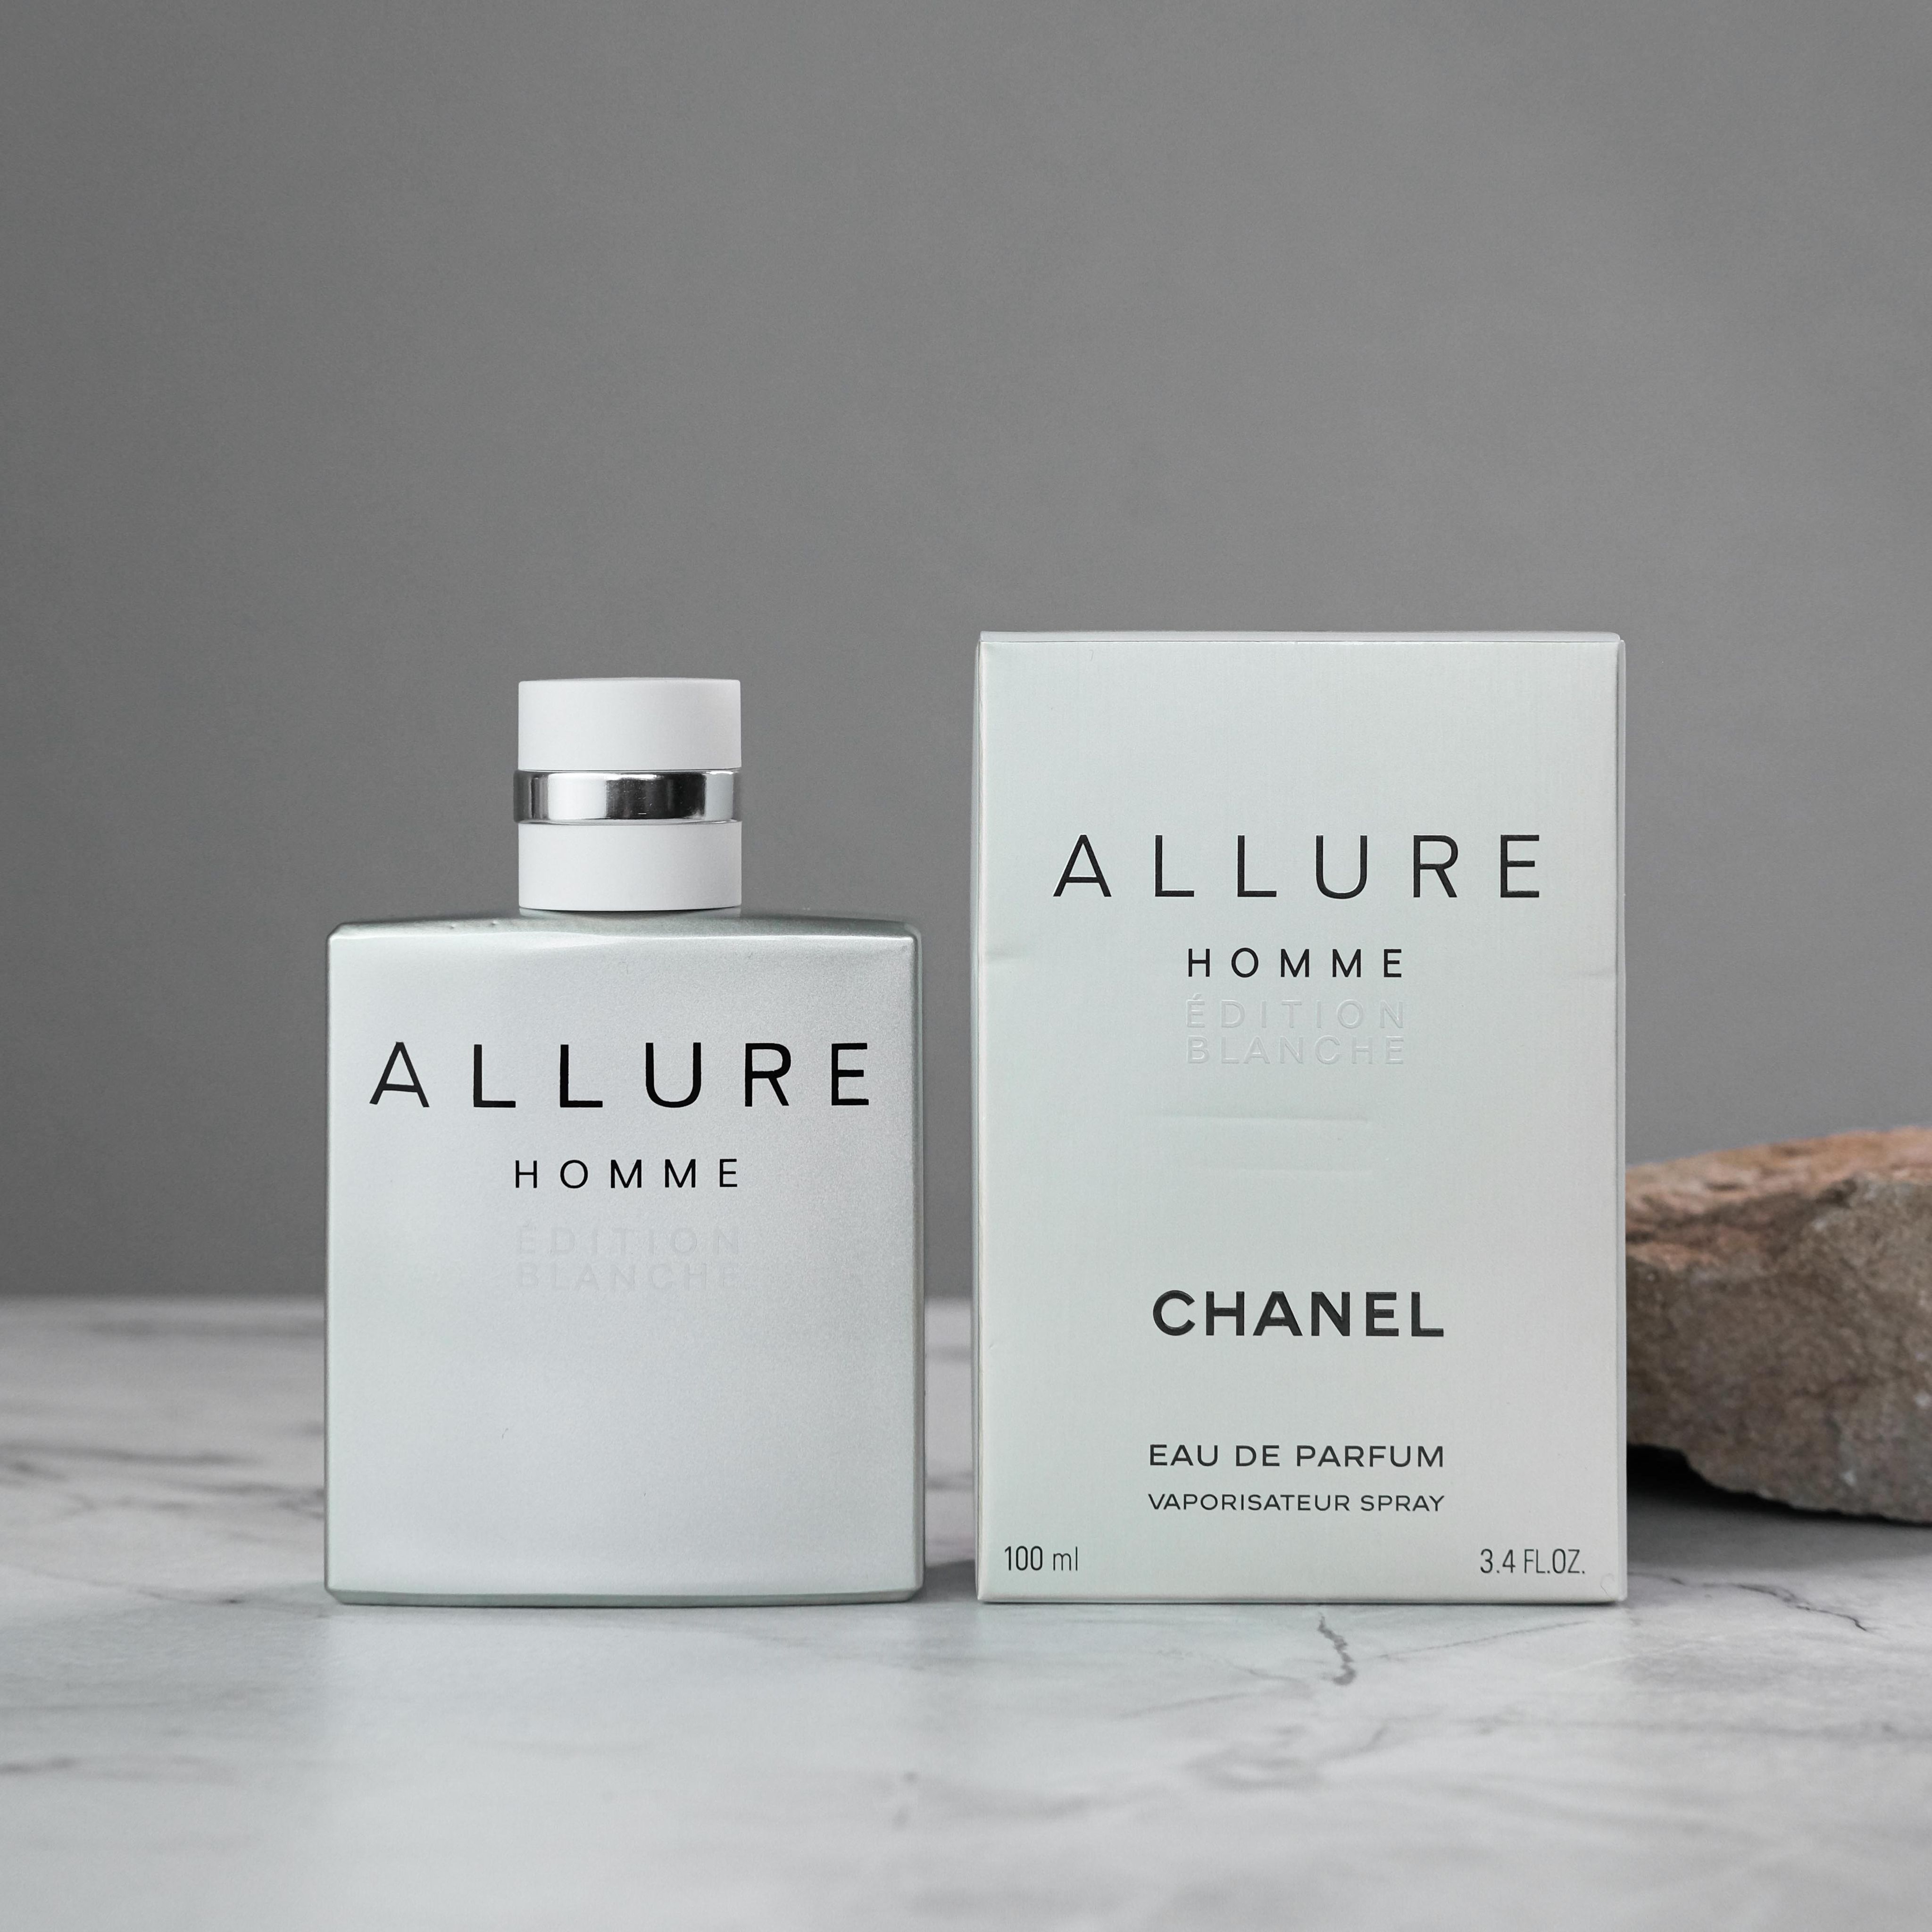 Chanel Allure homme Edition Blanche. Chanel Allure Edition Blanche. Allure homme Edition Blanche. Chanel Allure homme Edition Blanche EDP, 100 ml (Luxe евро). Chanel homme edition blanche